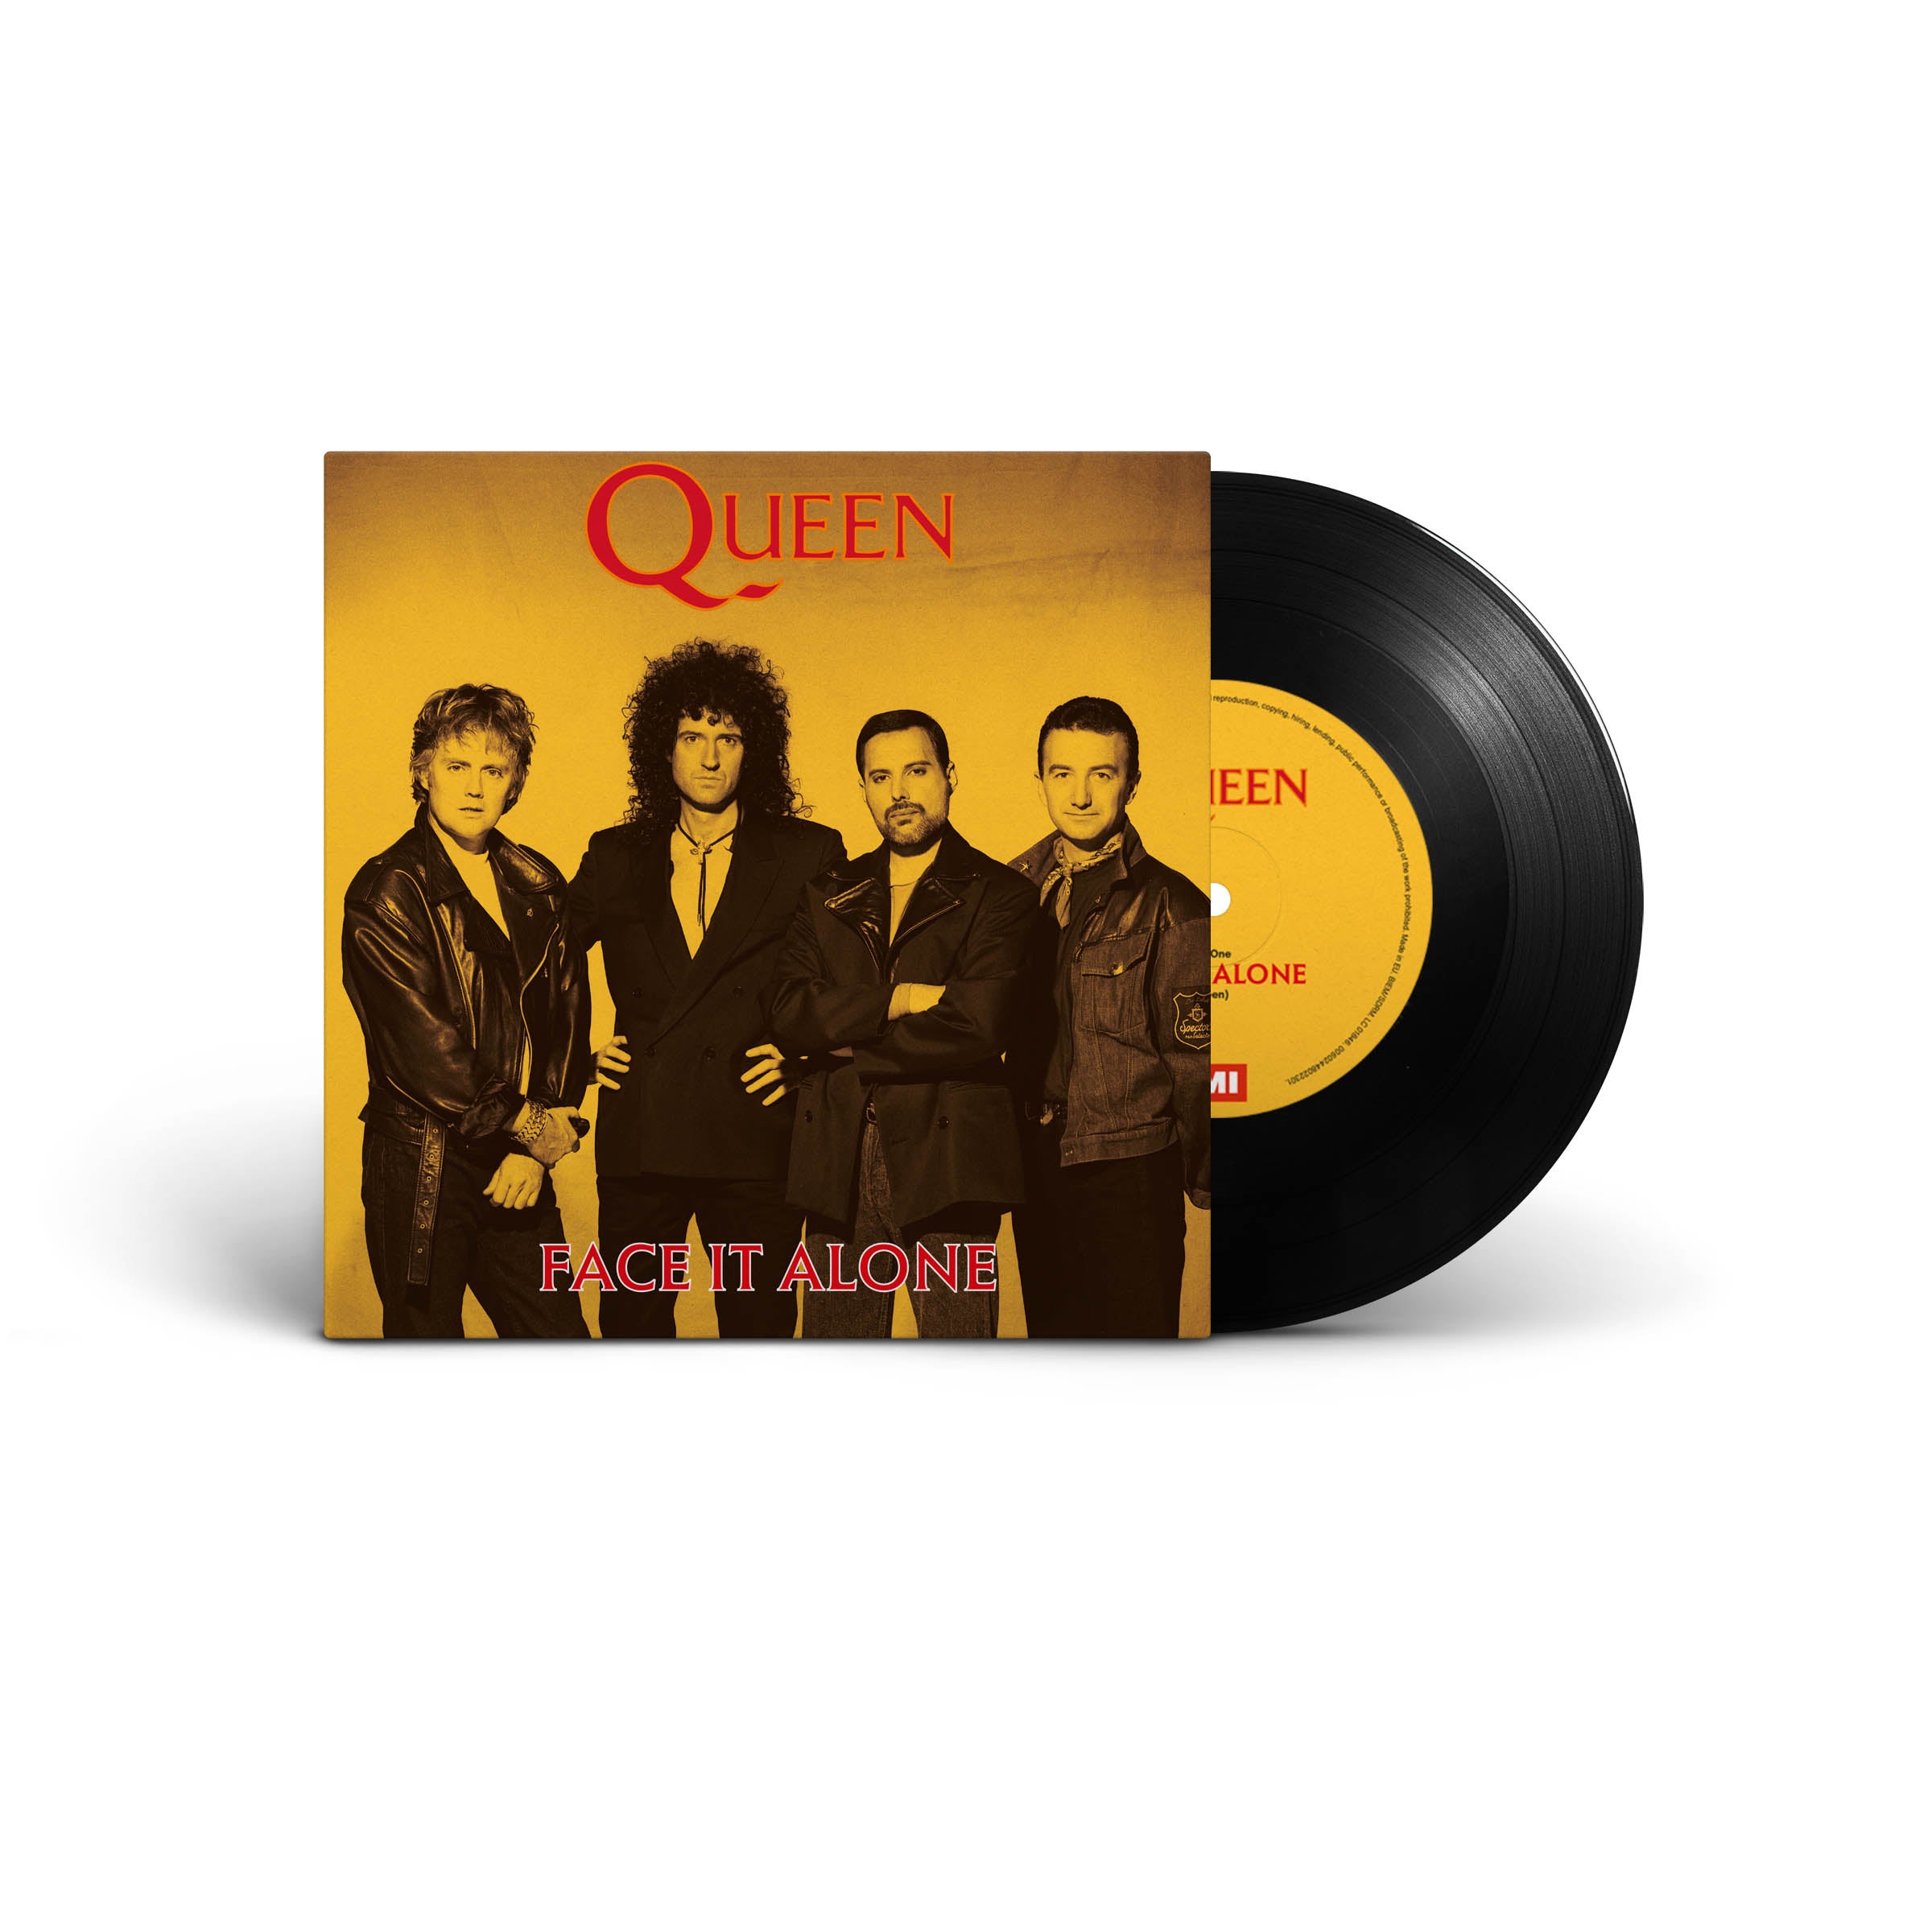 Queen’s “Face It Alone” is out today